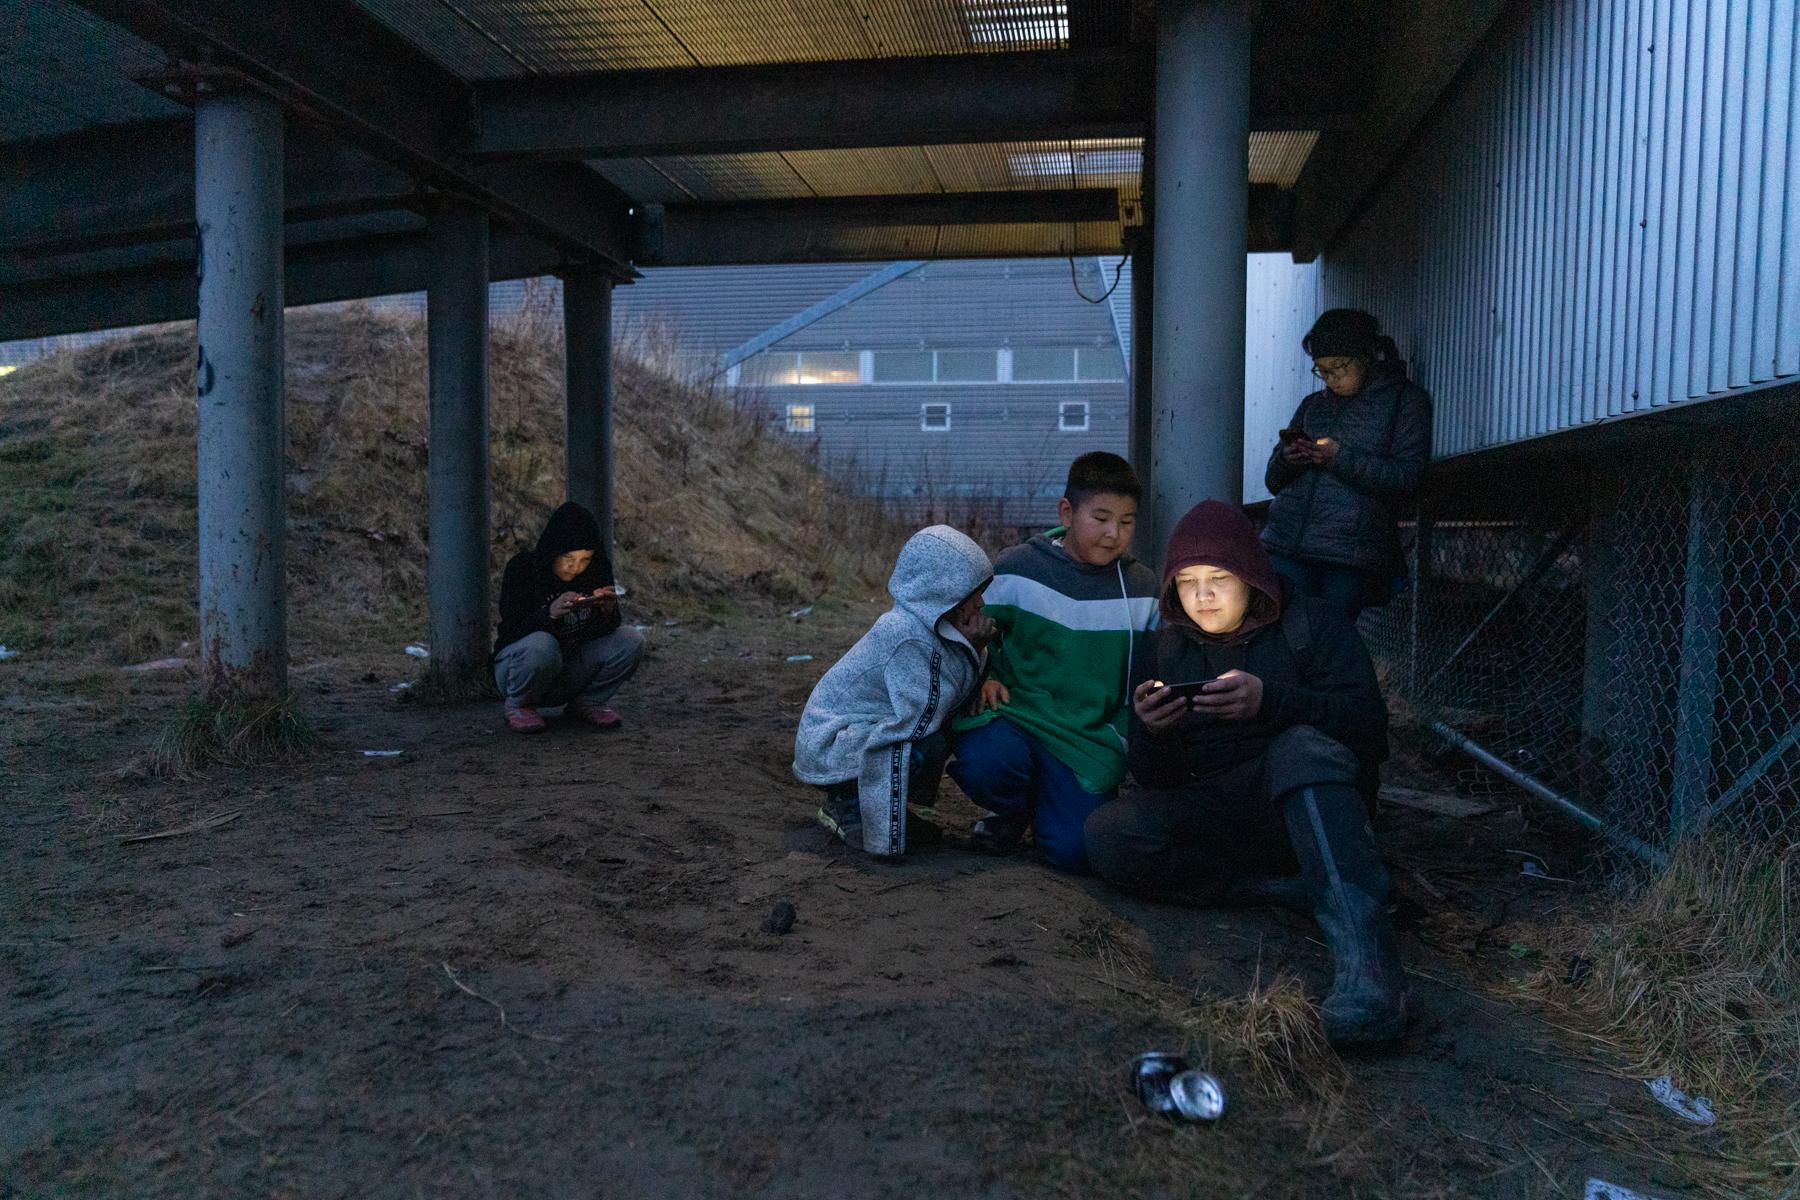 Internet Will Open My Eyes - Youth hang out near the school in Akiak, Alaska to access...